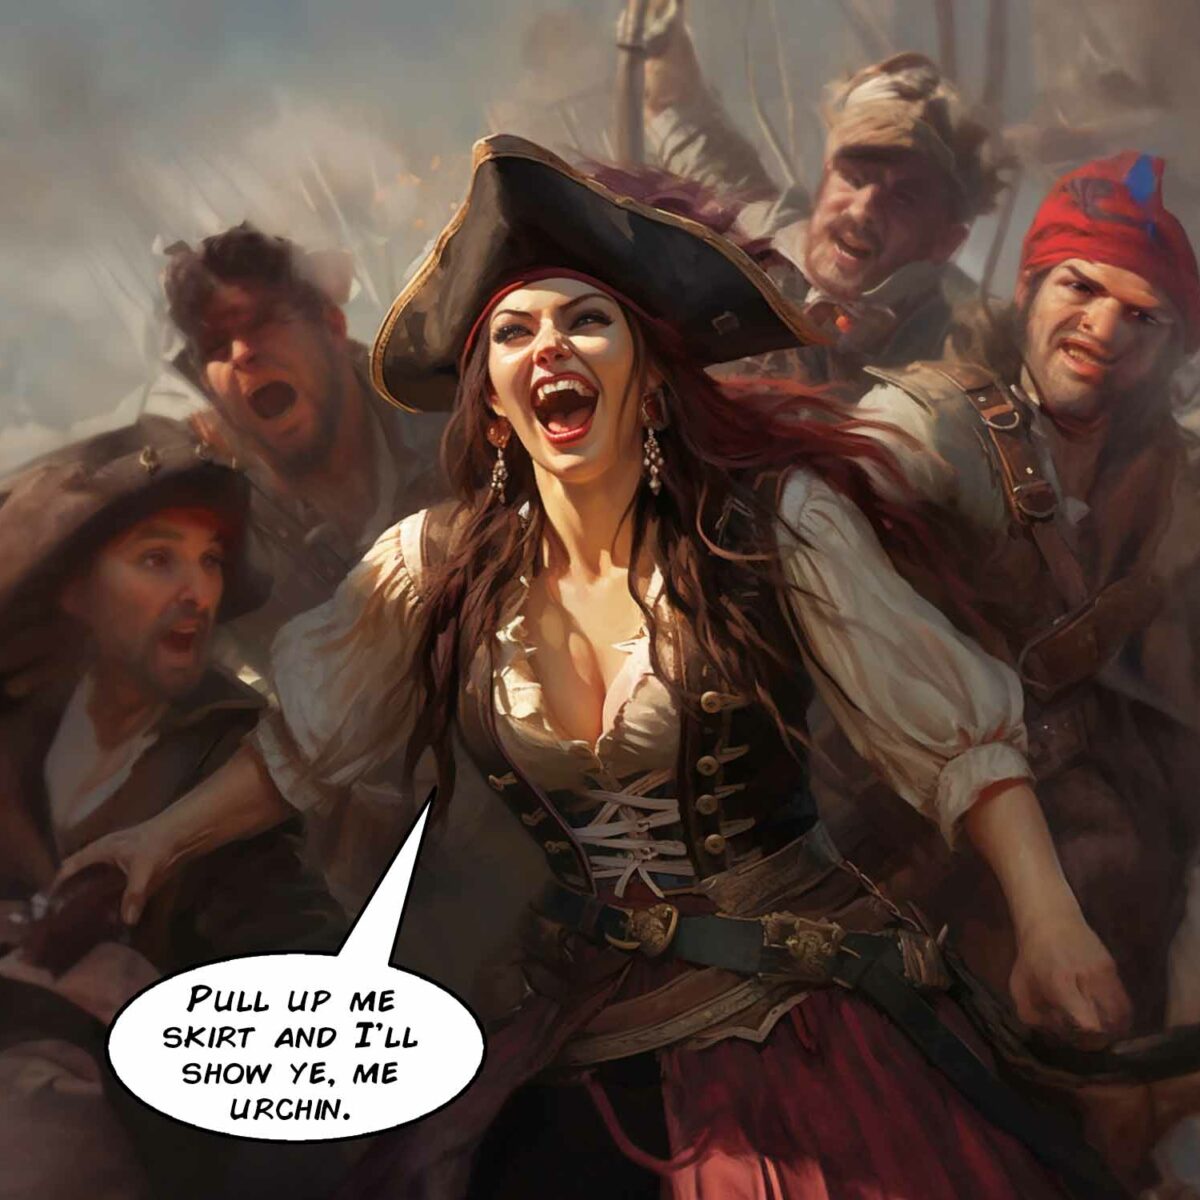 A Sexy Pirate Telling Dirty Female Pirate Pick Up Lines